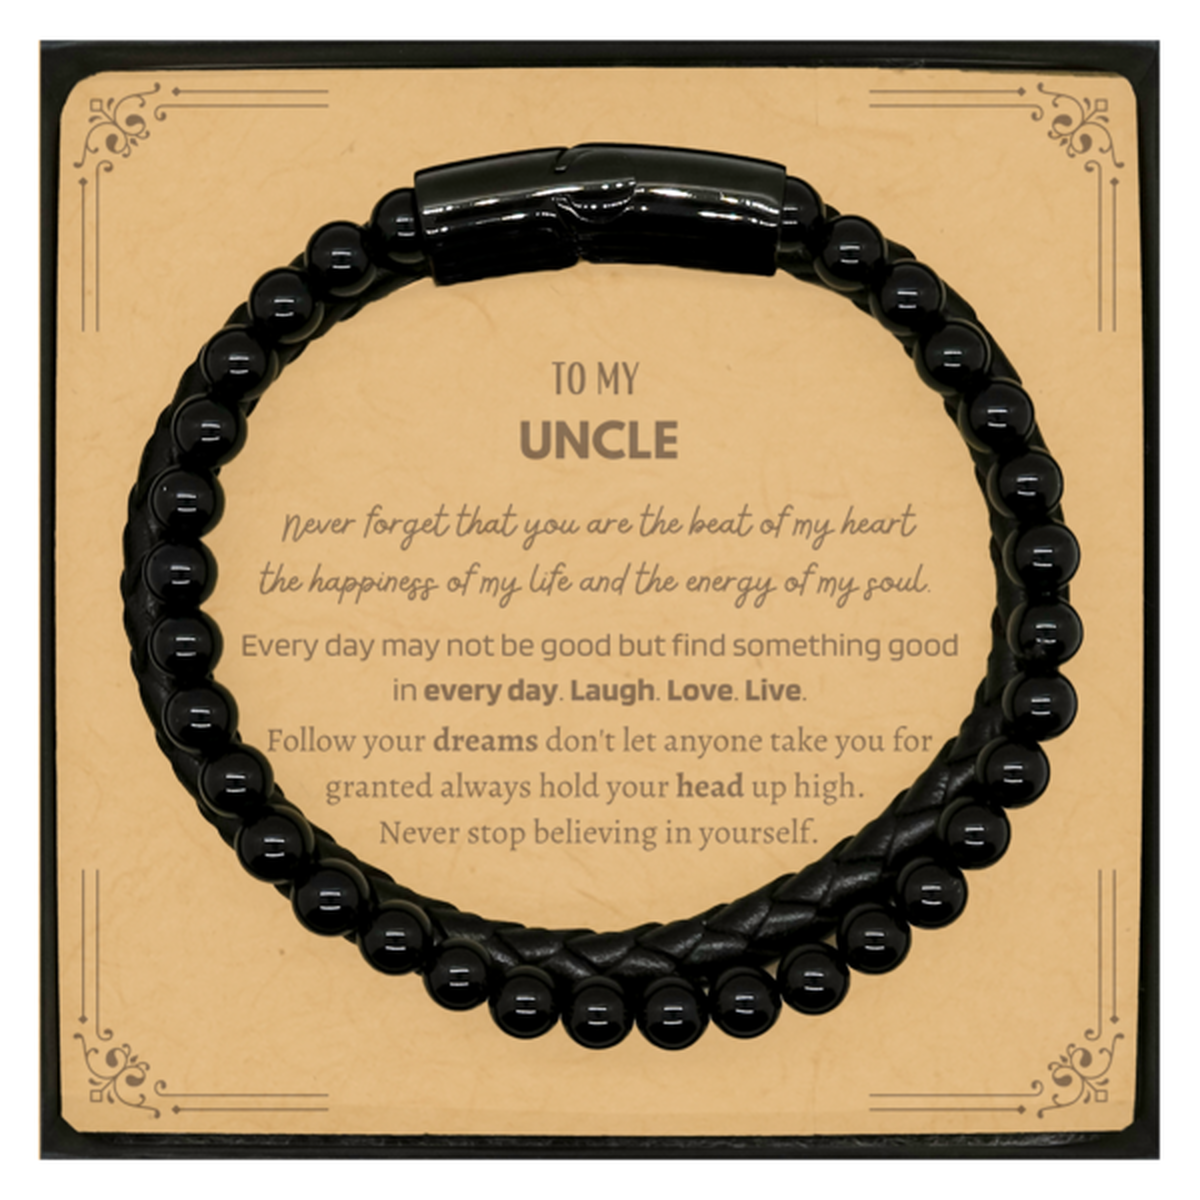 To My Uncle Message Card Gifts, Christmas Uncle Stone Leather Bracelets Present, Birthday Unique Motivational For Uncle, To My Uncle Never forget that you are the beat of my heart the happiness of my life and the energy of my soul